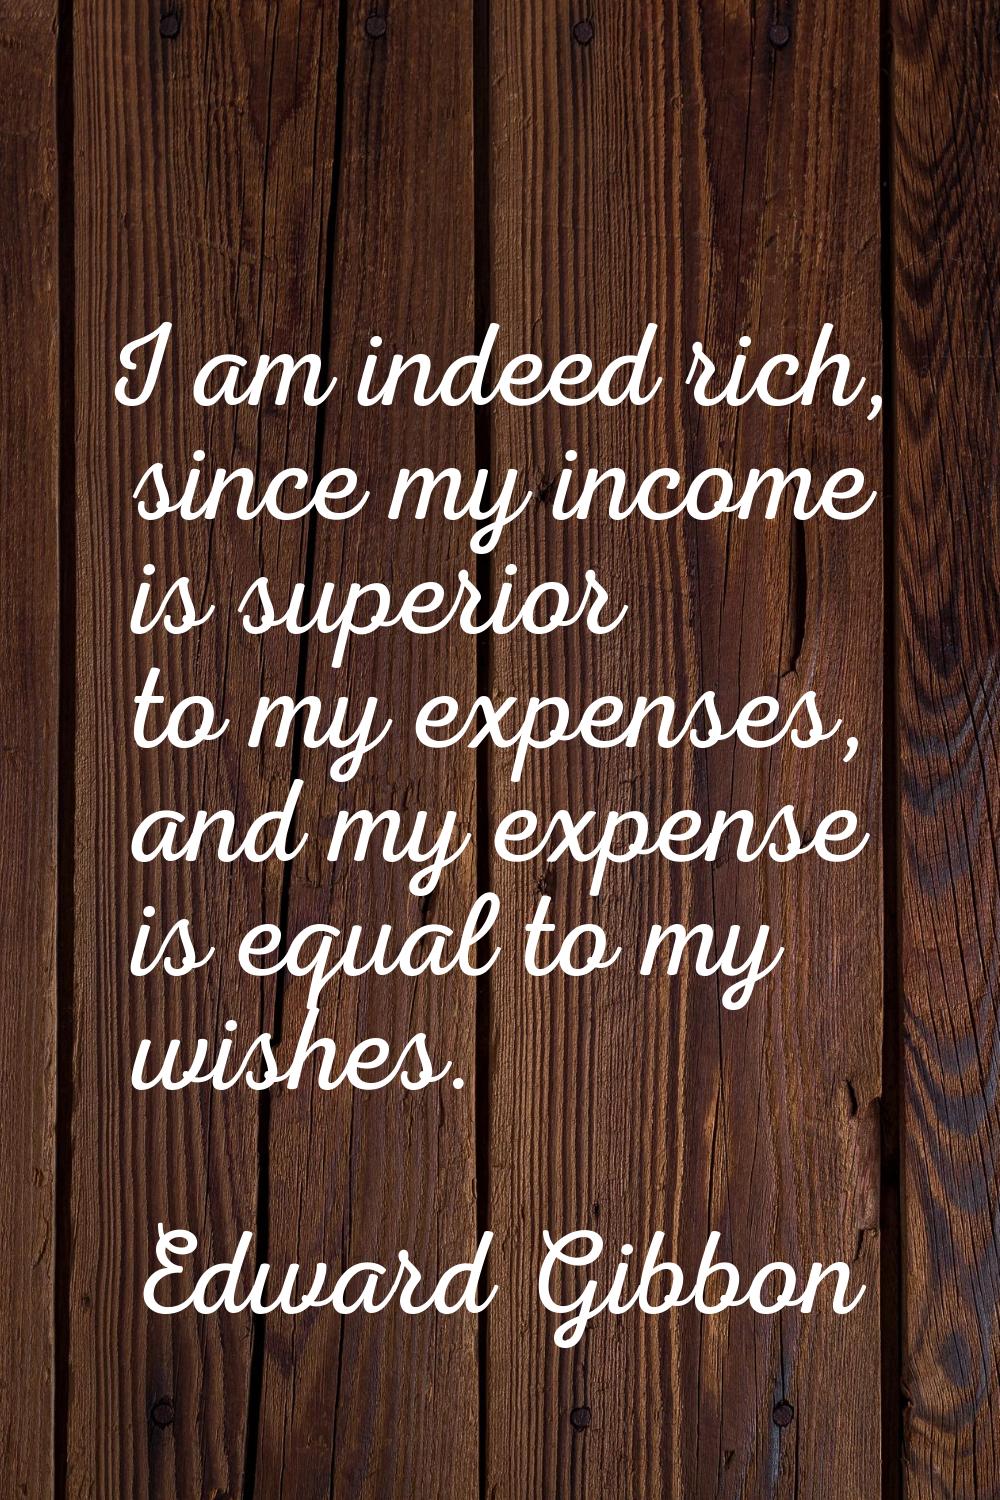 I am indeed rich, since my income is superior to my expenses, and my expense is equal to my wishes.